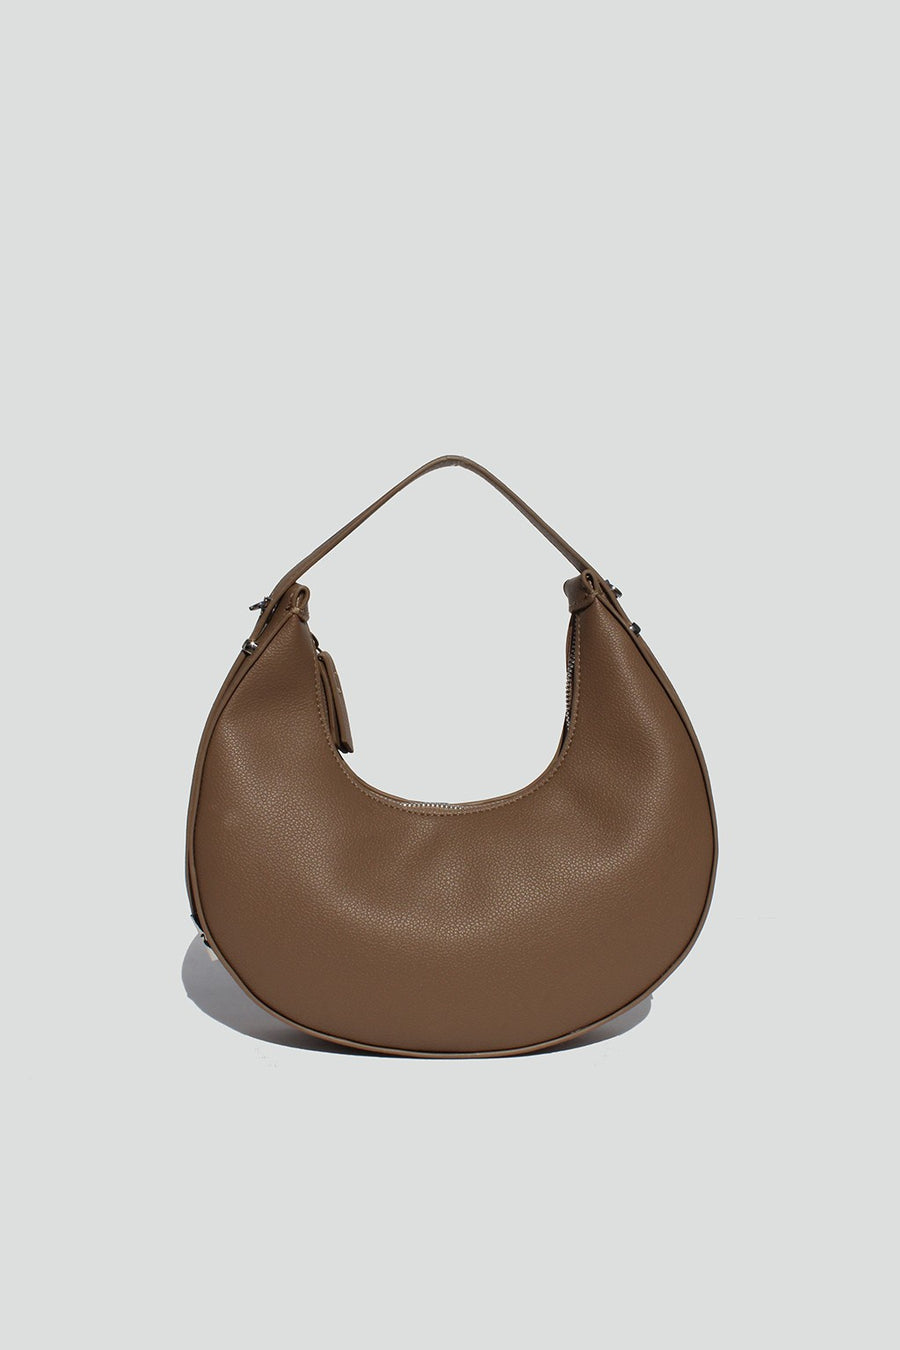 Featuring a Shoulder/Crossbody bag, comes with an adjustable strap and two interior pockets in the color taupe 